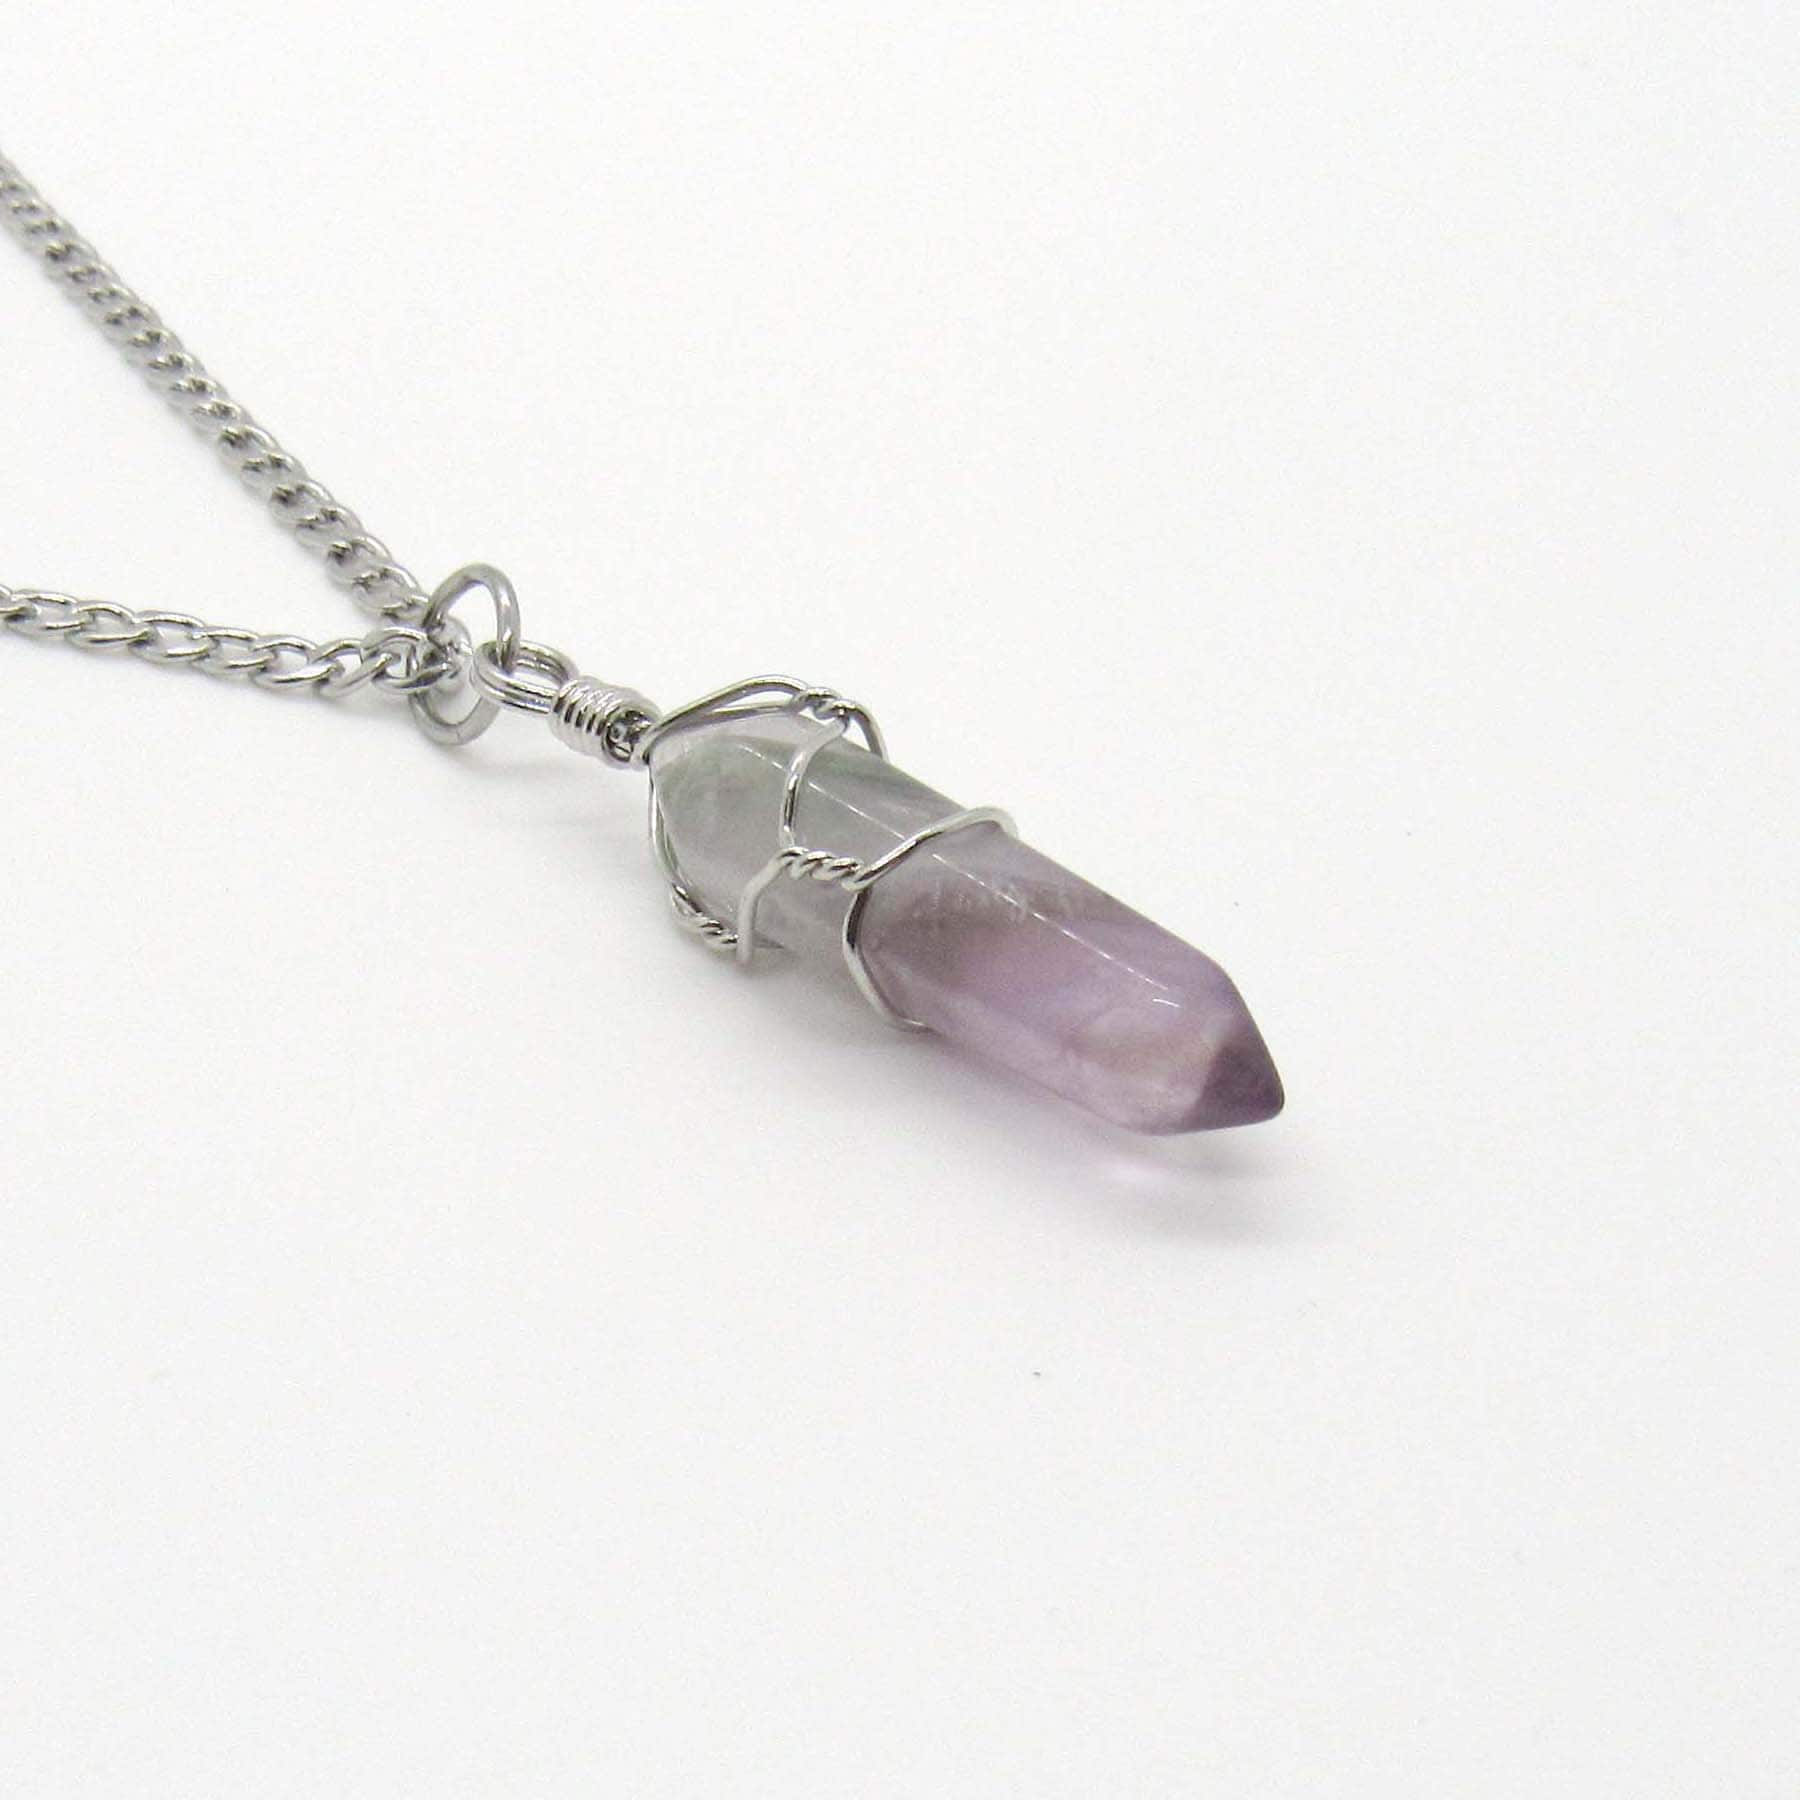 Amethyst Gemstone Pendant Necklace in Sterling Silver  Wire Wrapped 